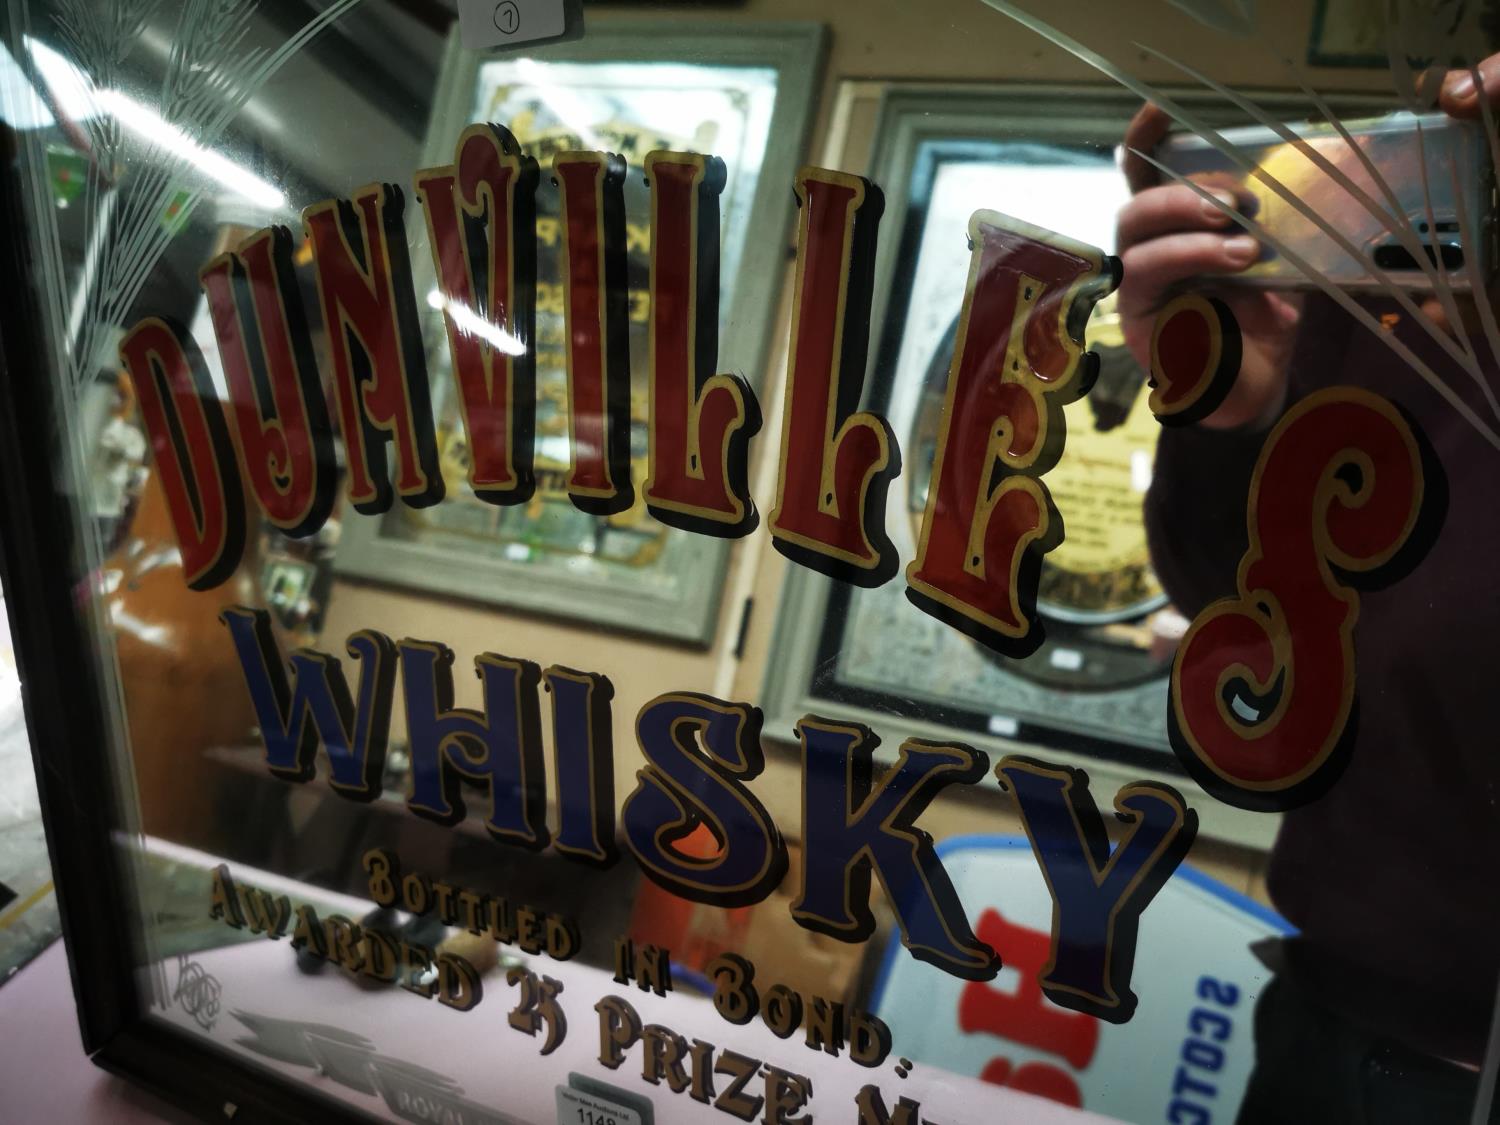 Dunville's Whiskey framed advertising mirror. - Image 2 of 2